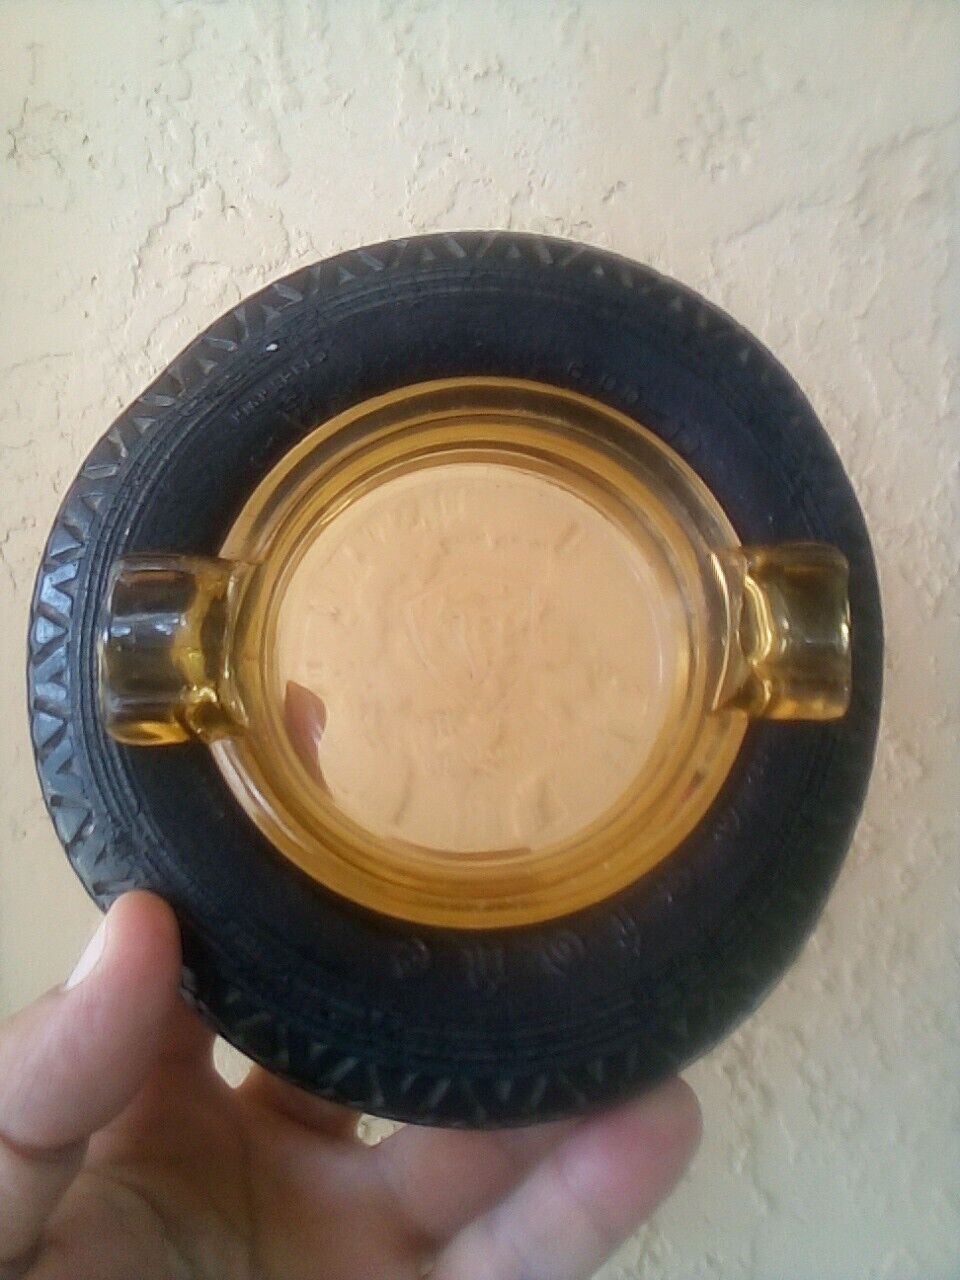 Vintage Amber Firestone Tire Ashtray The Mark Of Quality Amber Glass Insert